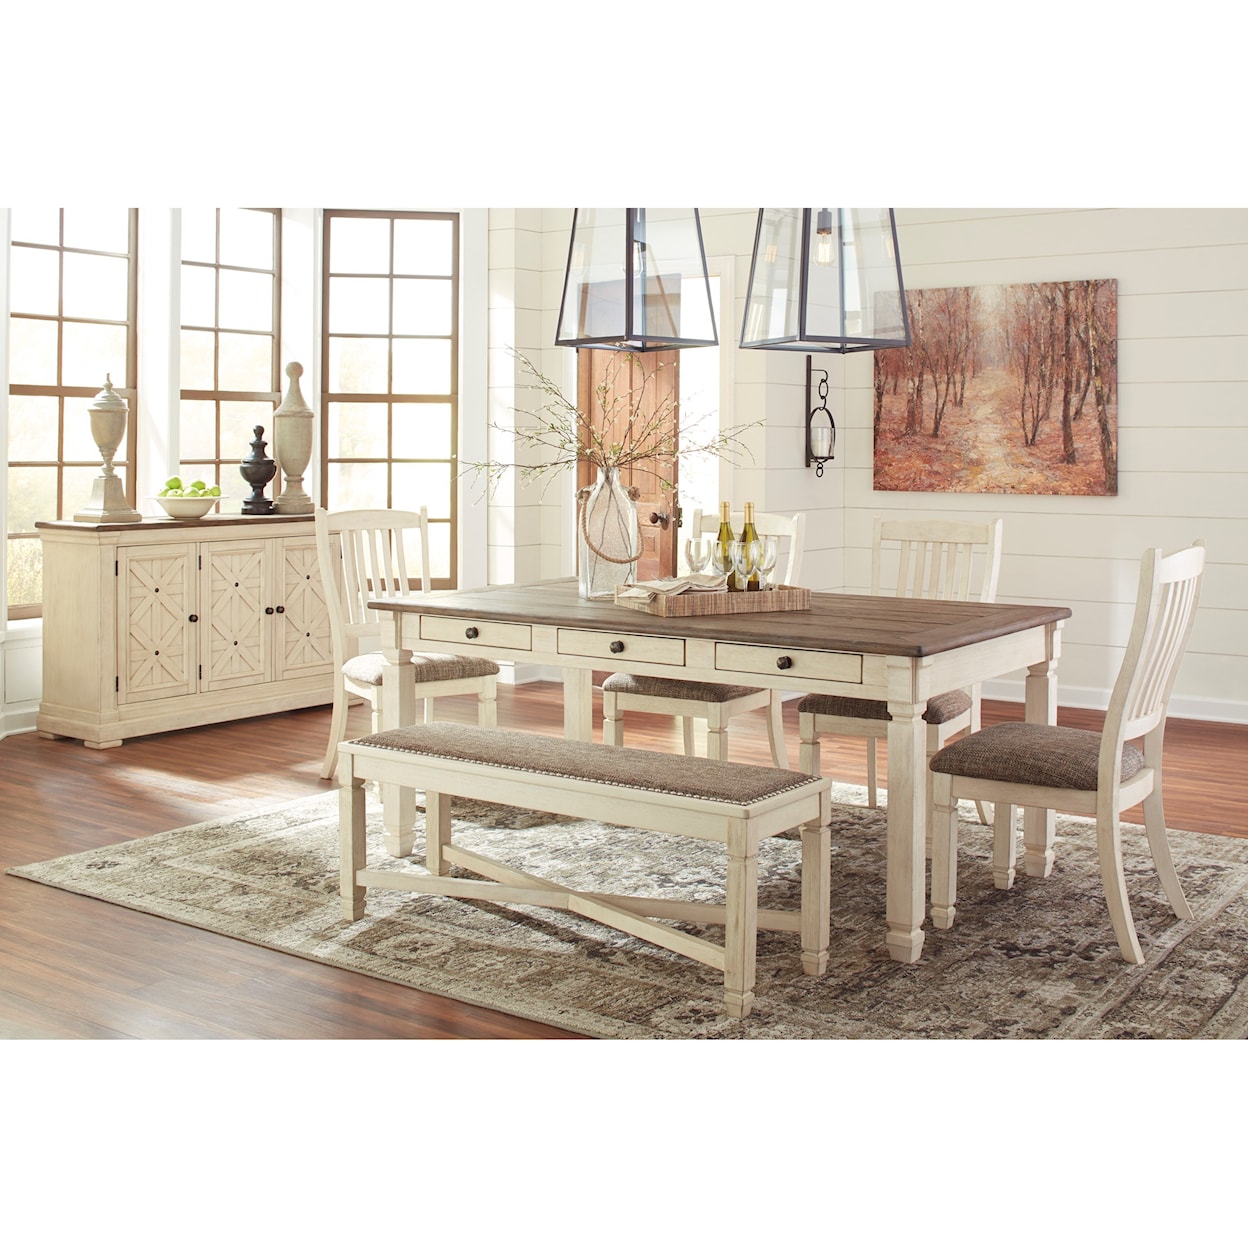 Signature Design by Ashley Furniture Bolanburg Formal Dining Room Group